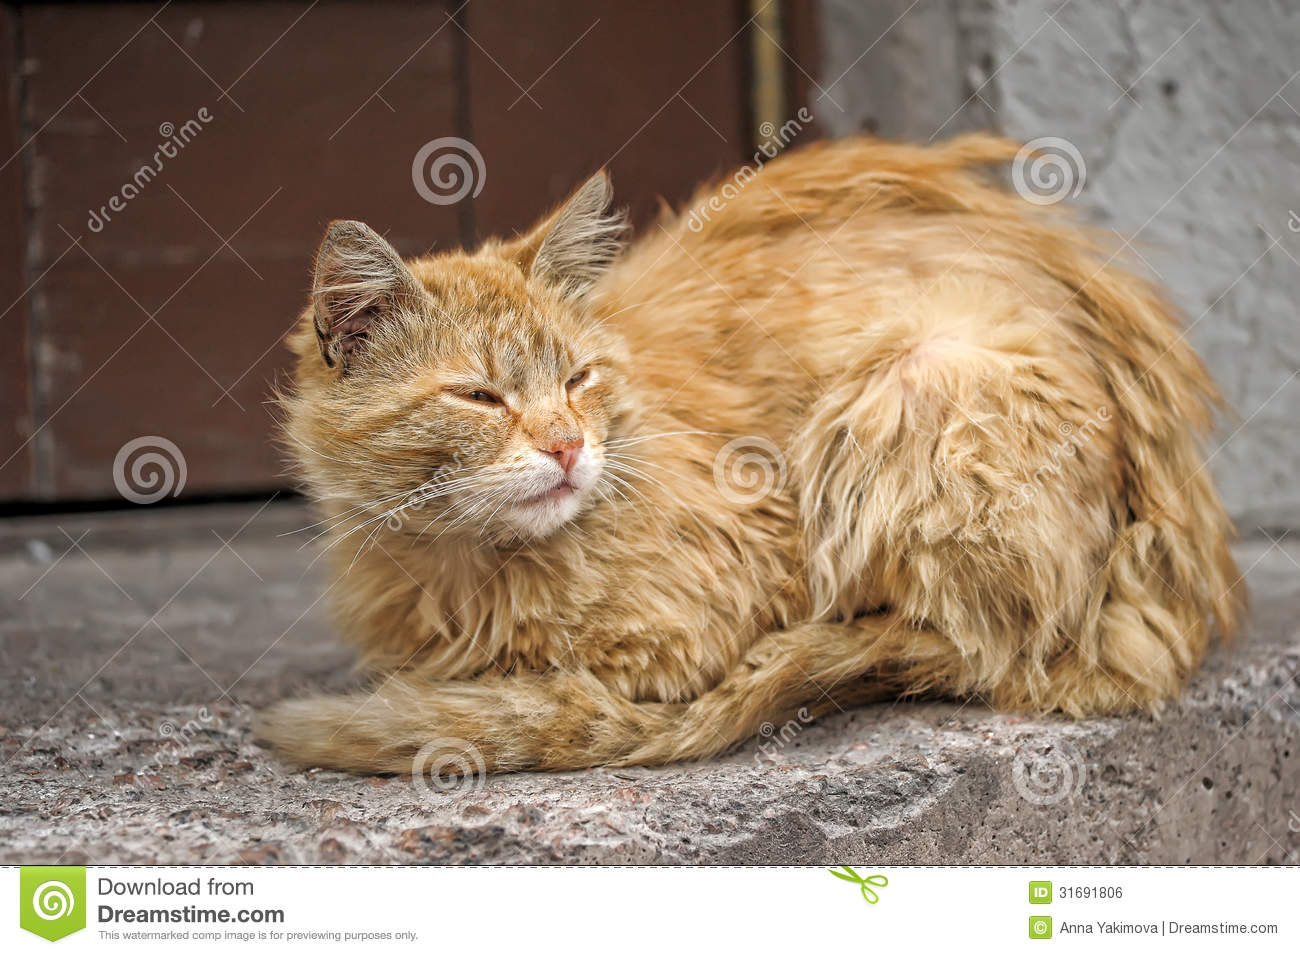 Homeless Cat Royalty Free Stock Image   Image  31691806